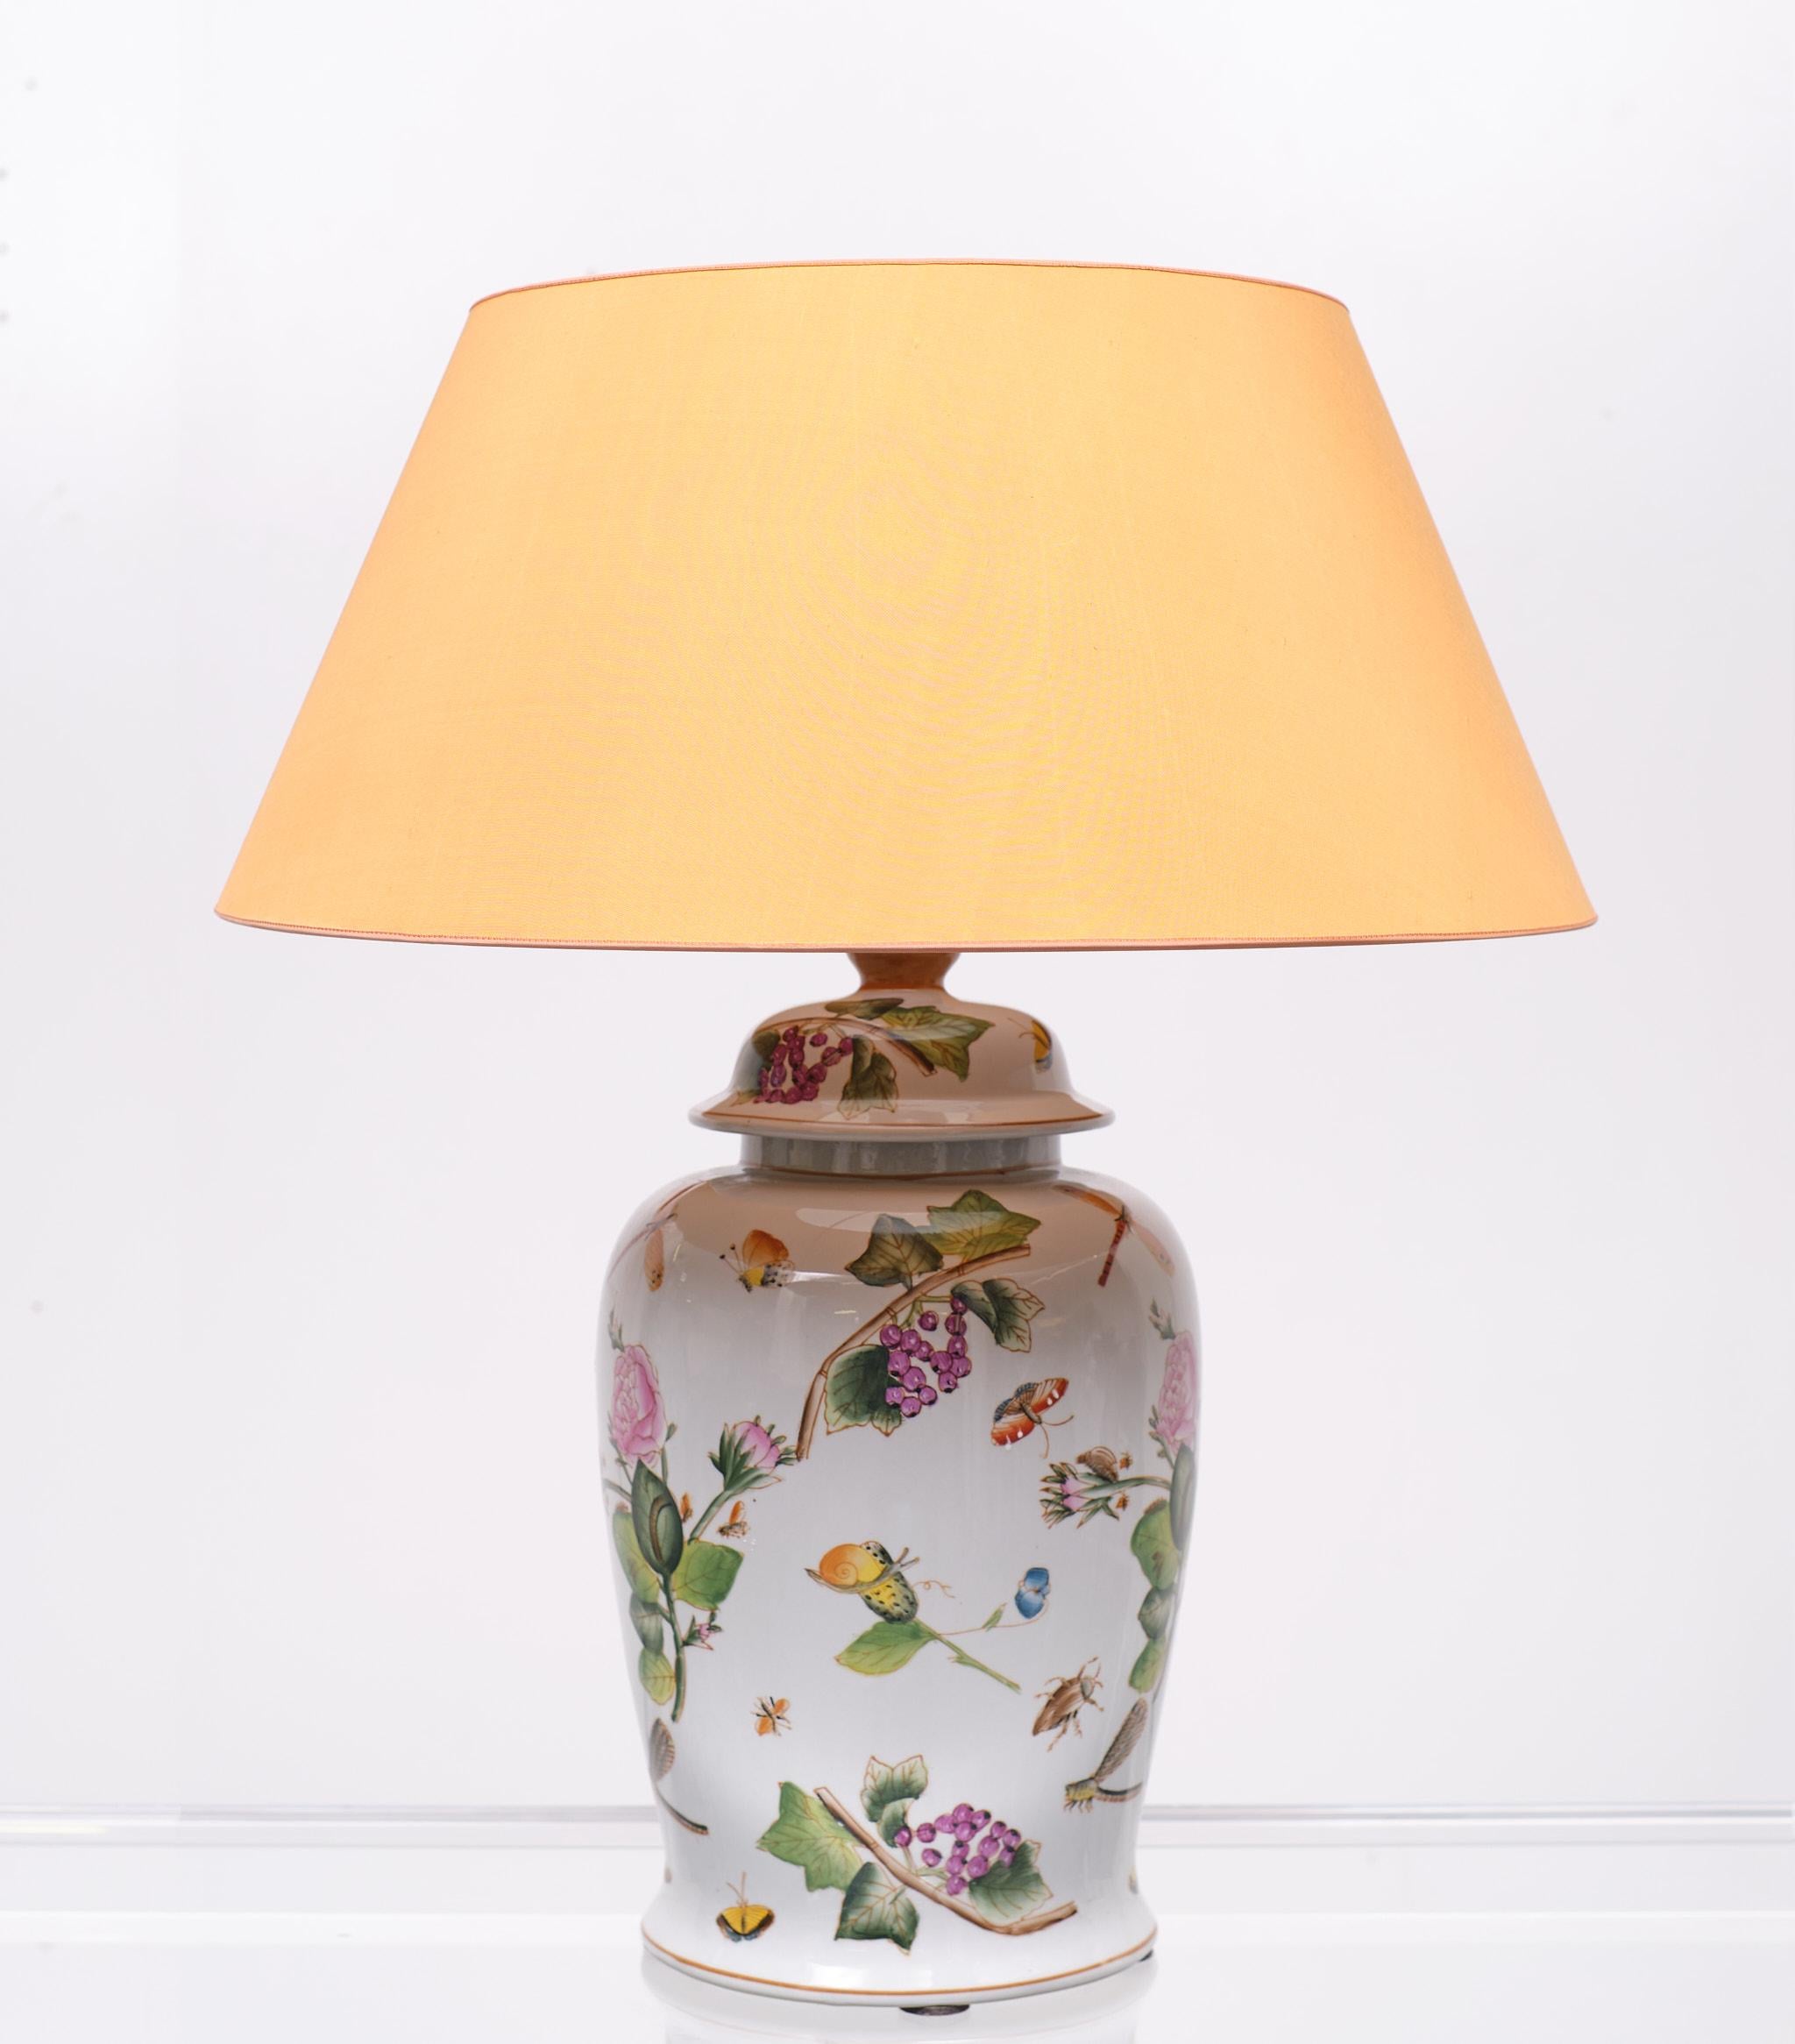 Beautiful large table lamp. Manufactured by Artdecor Collection Germany hand painted whit al kind off insects and flowers grapes. Ceramic base comes with a matching shade. Top quality from Germany. Very good condition. Great looking table lamp.
 